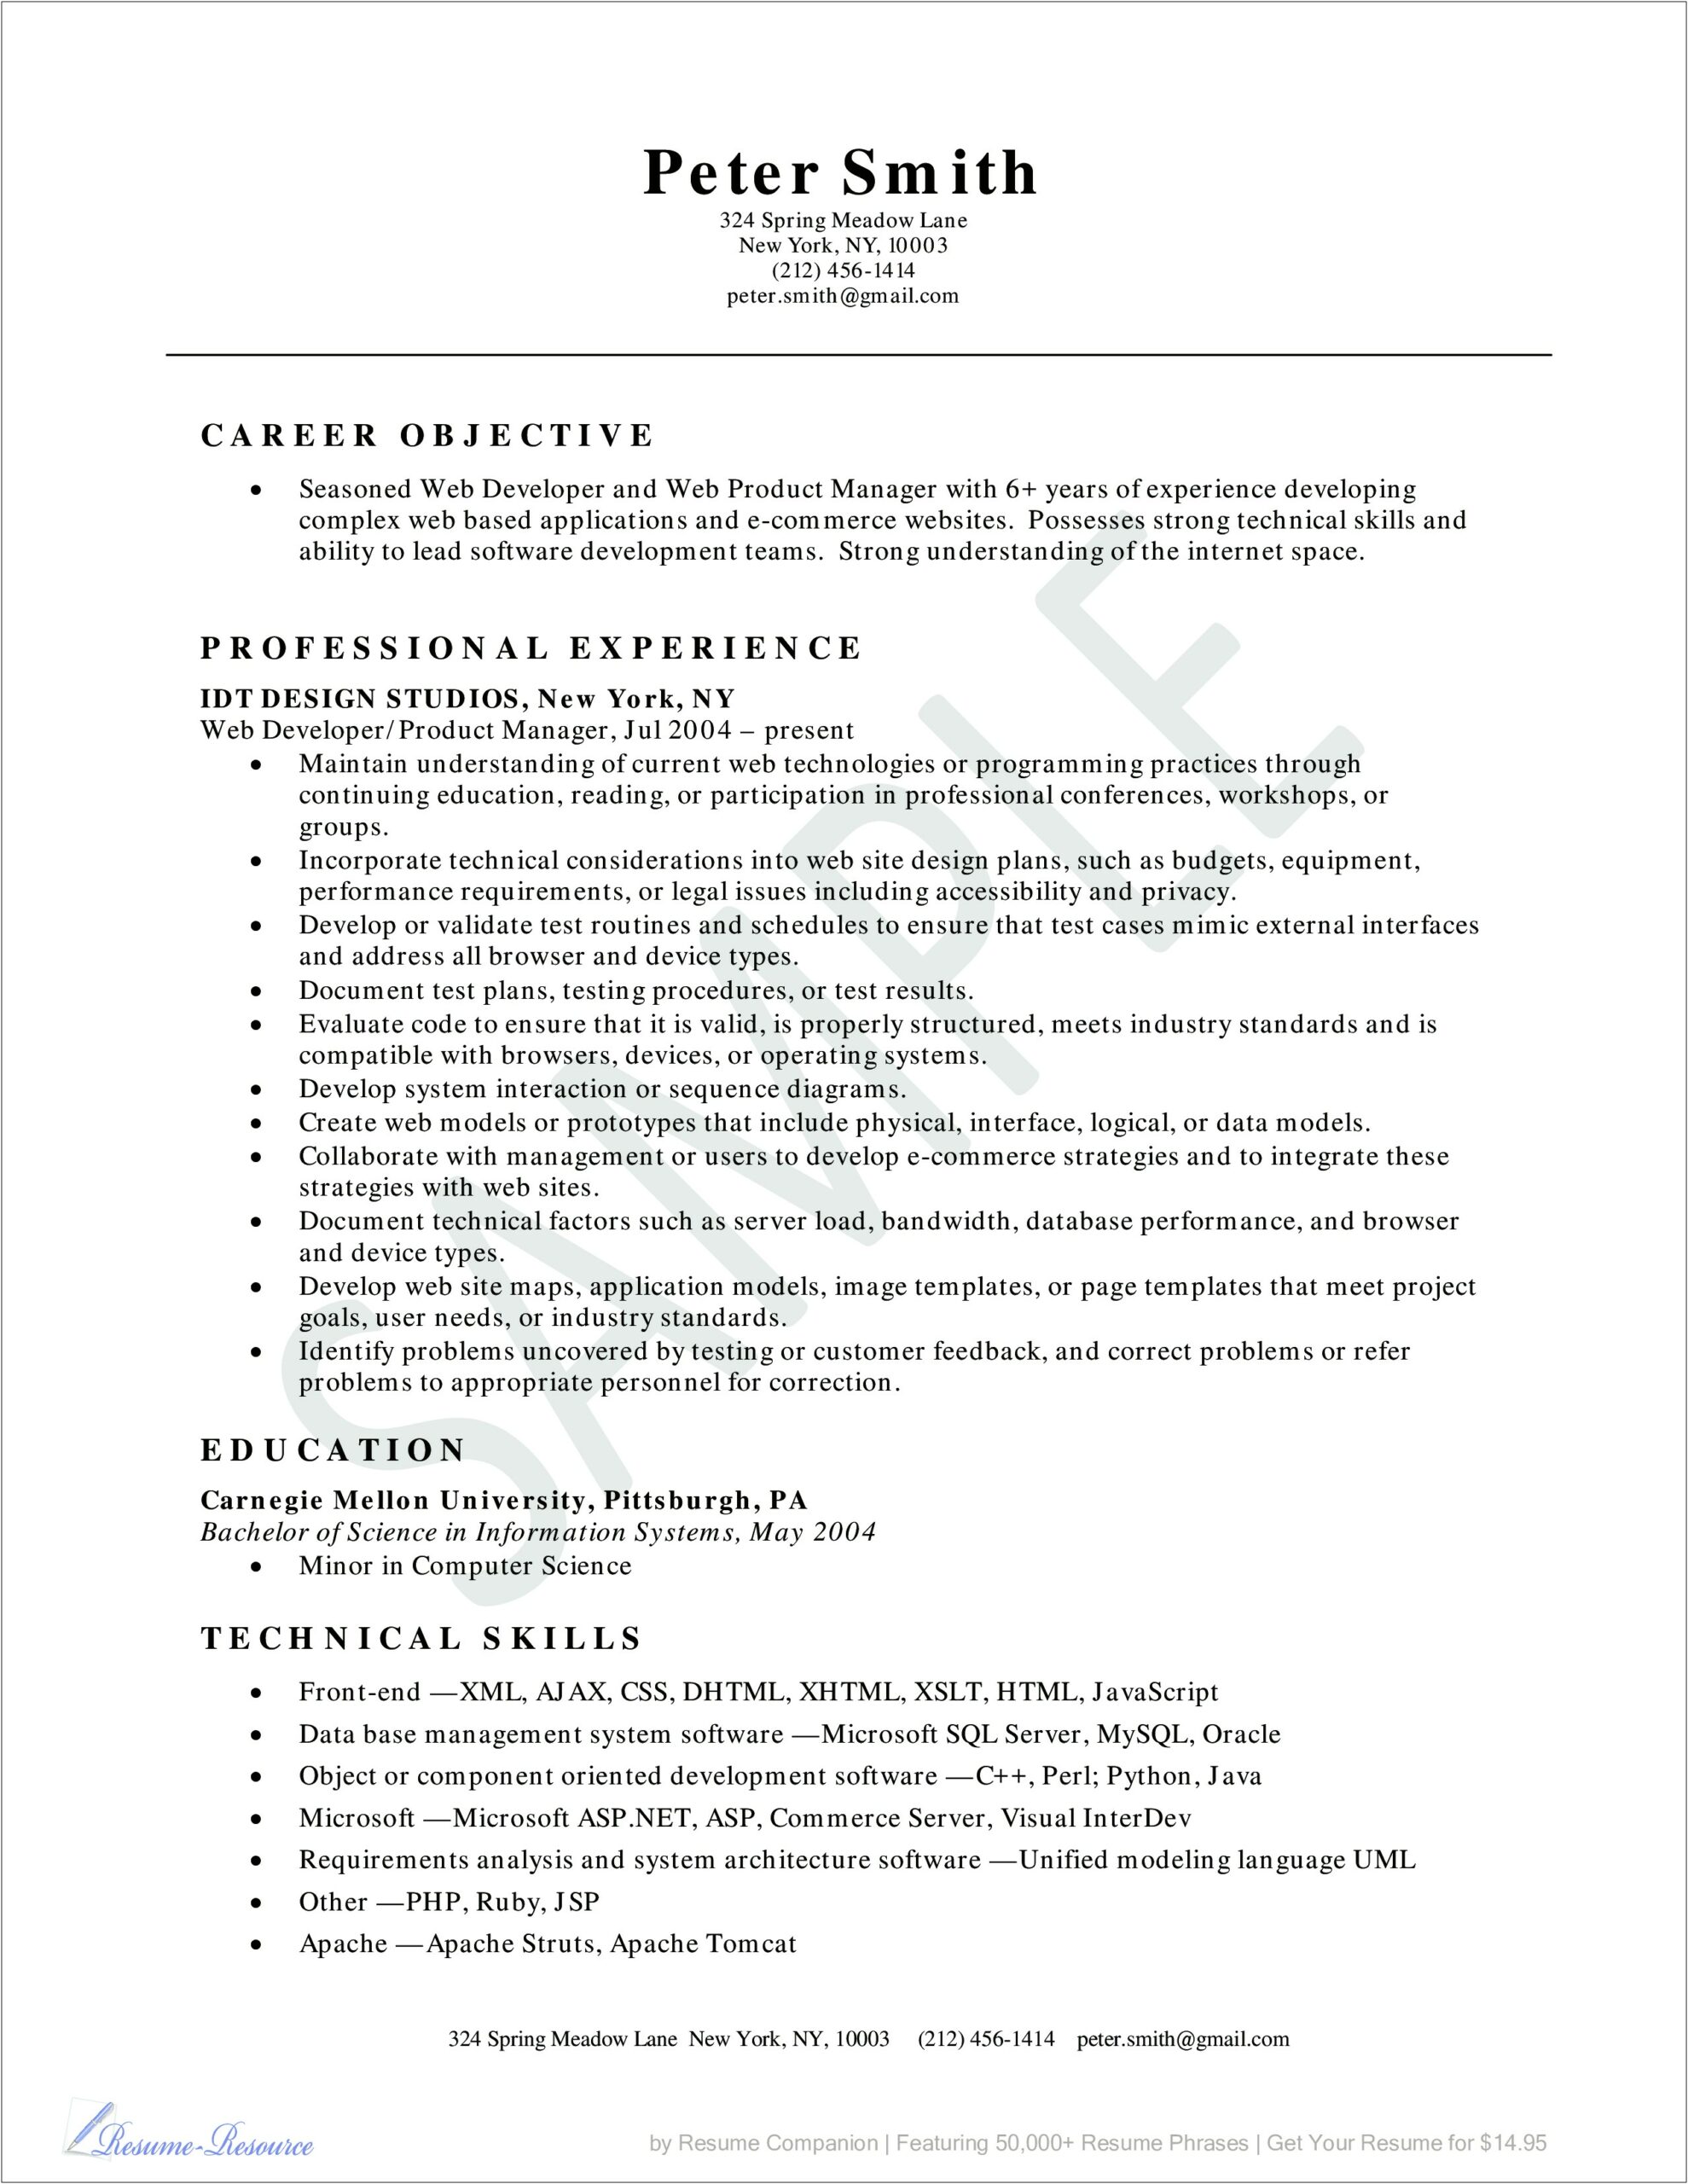 Computer Software Resume Career Objective